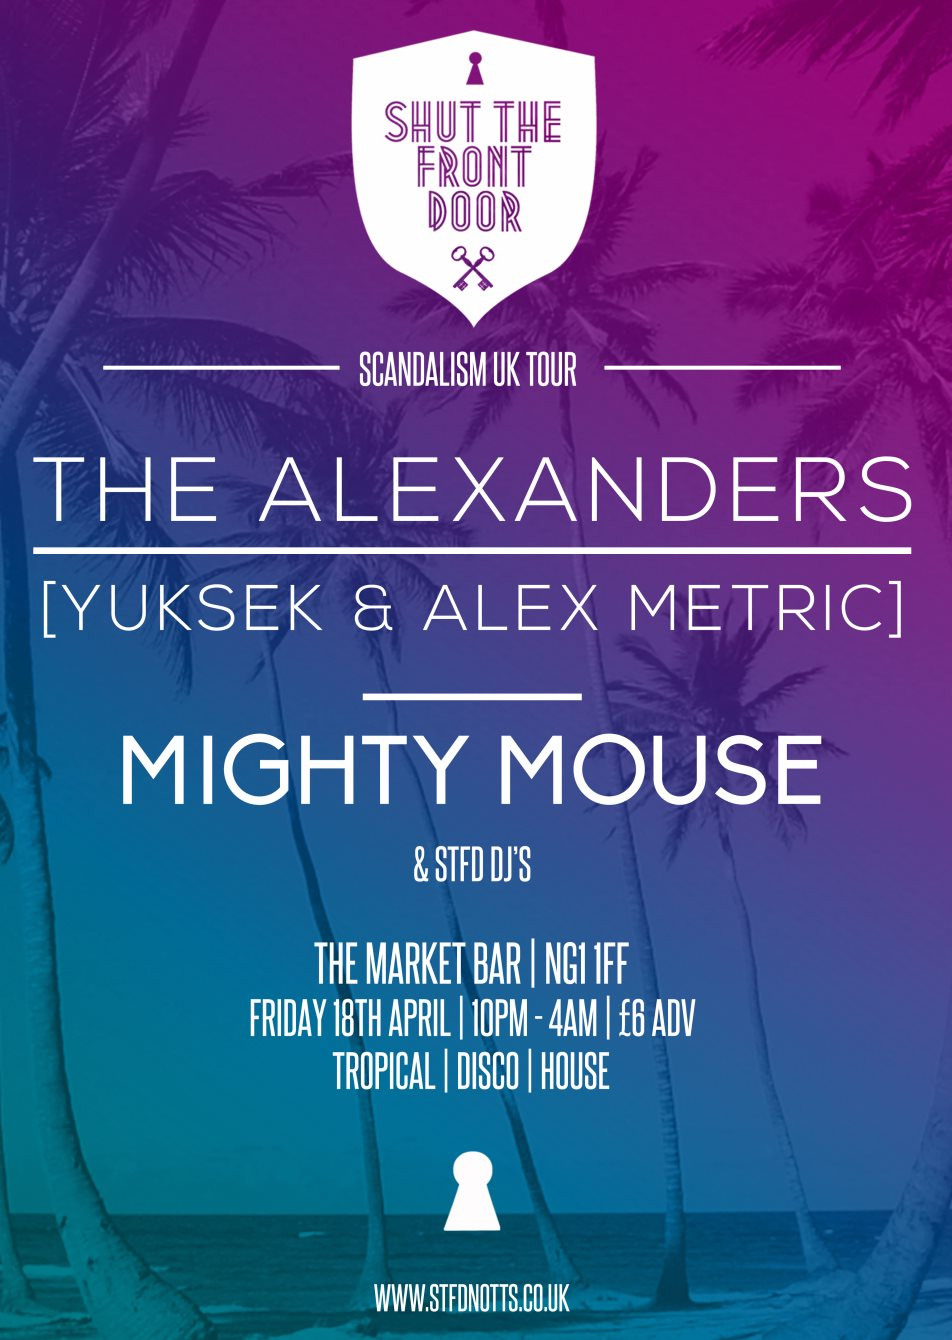 Shut The Front Door: Scandalism UK Tour with The Alexanders & Mighty Mouse - Flyer front